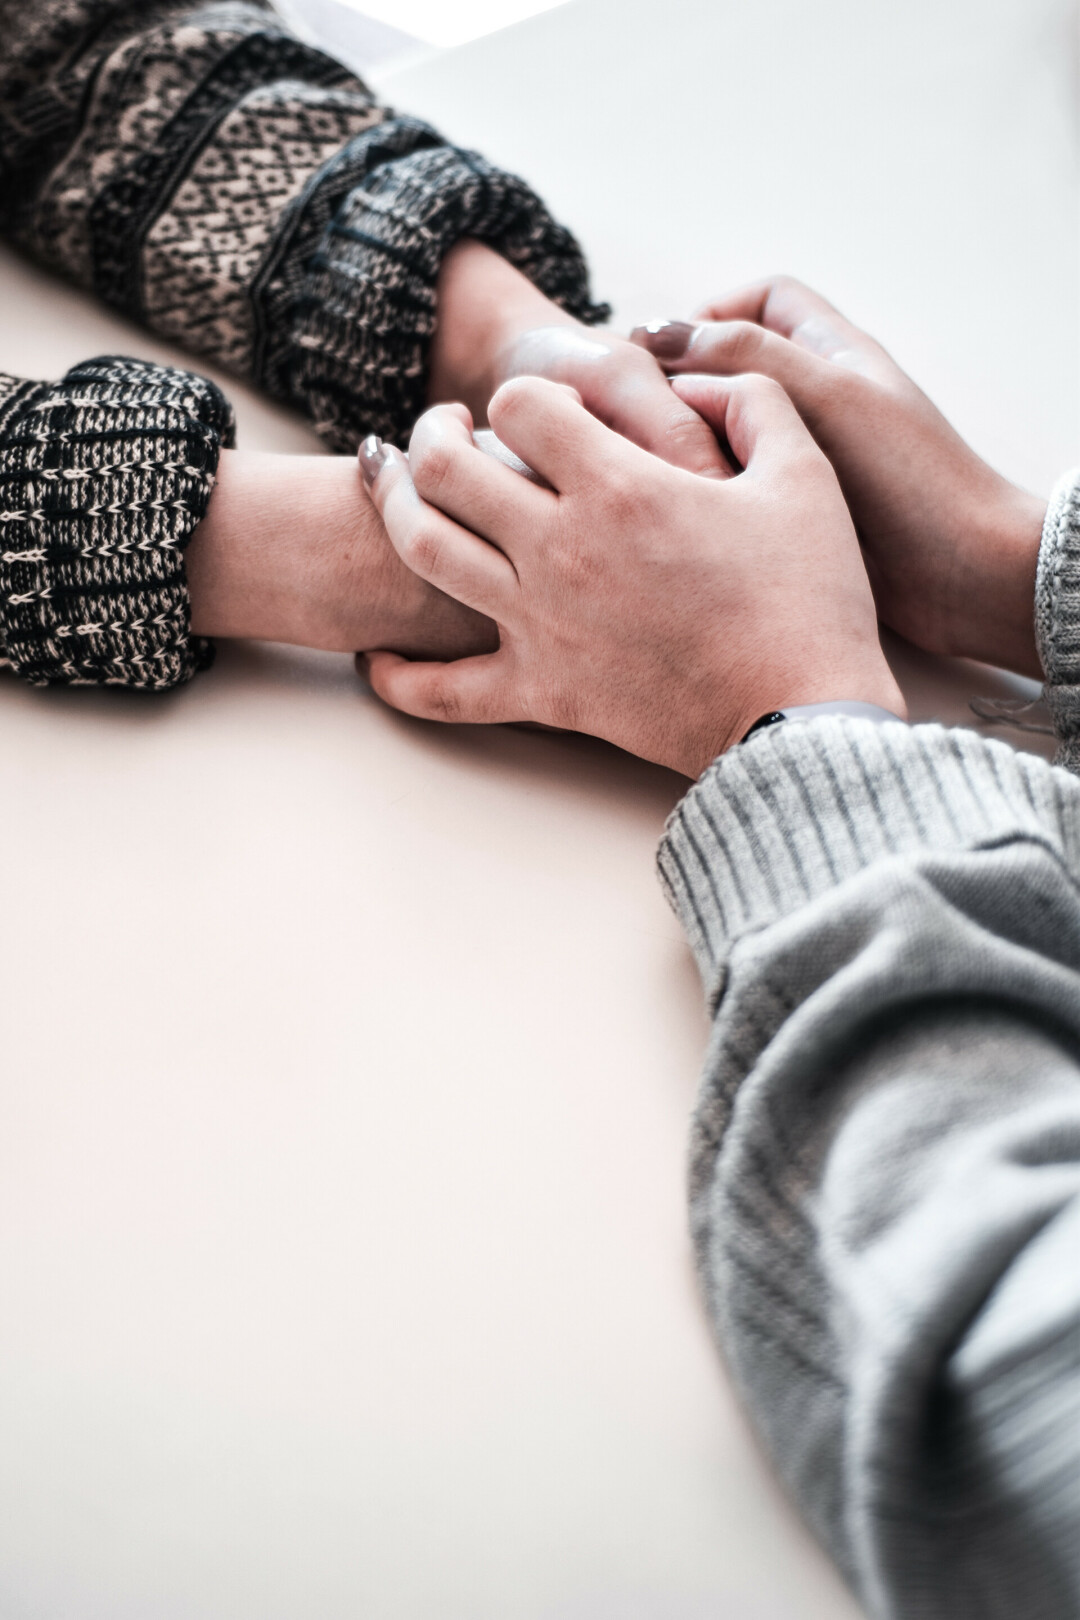 IT'S OKAY TO ASK FOR HELP. The LSS Renewed Strength Program is helping women in Wisconsin recover and live healthier lives. (Photo via Unsplash)